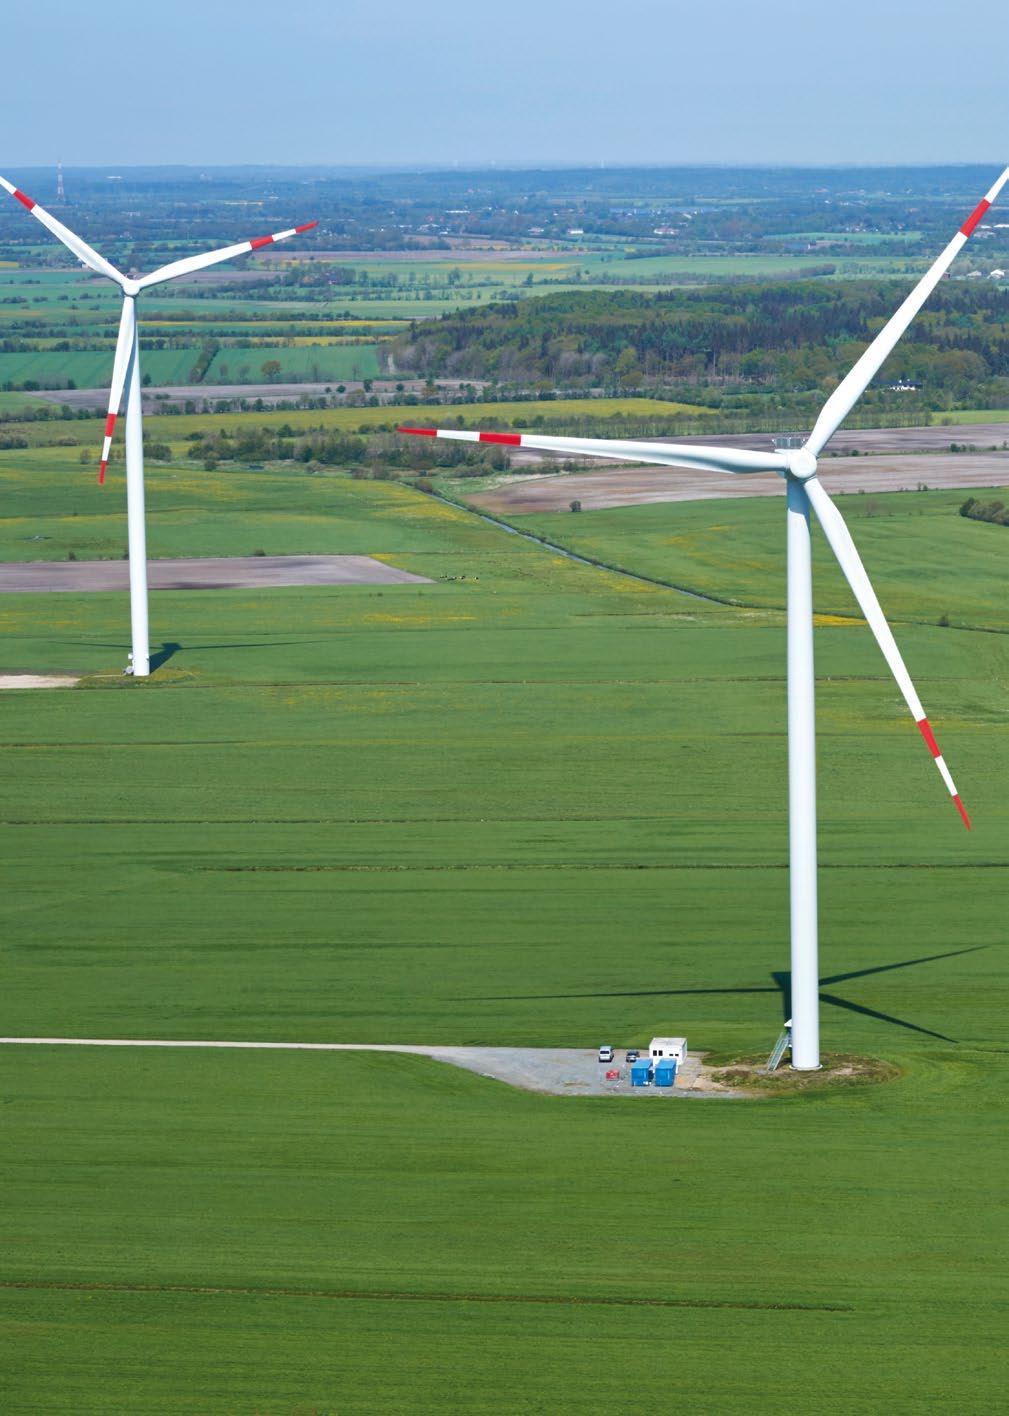 12 Delta Generation DELTA GENERATION IN THE FIELD Tried-and-tested performance In mid-2013 Nordex installed the first two Delta Generation turbines for strong and average wind speeds in the Janneby